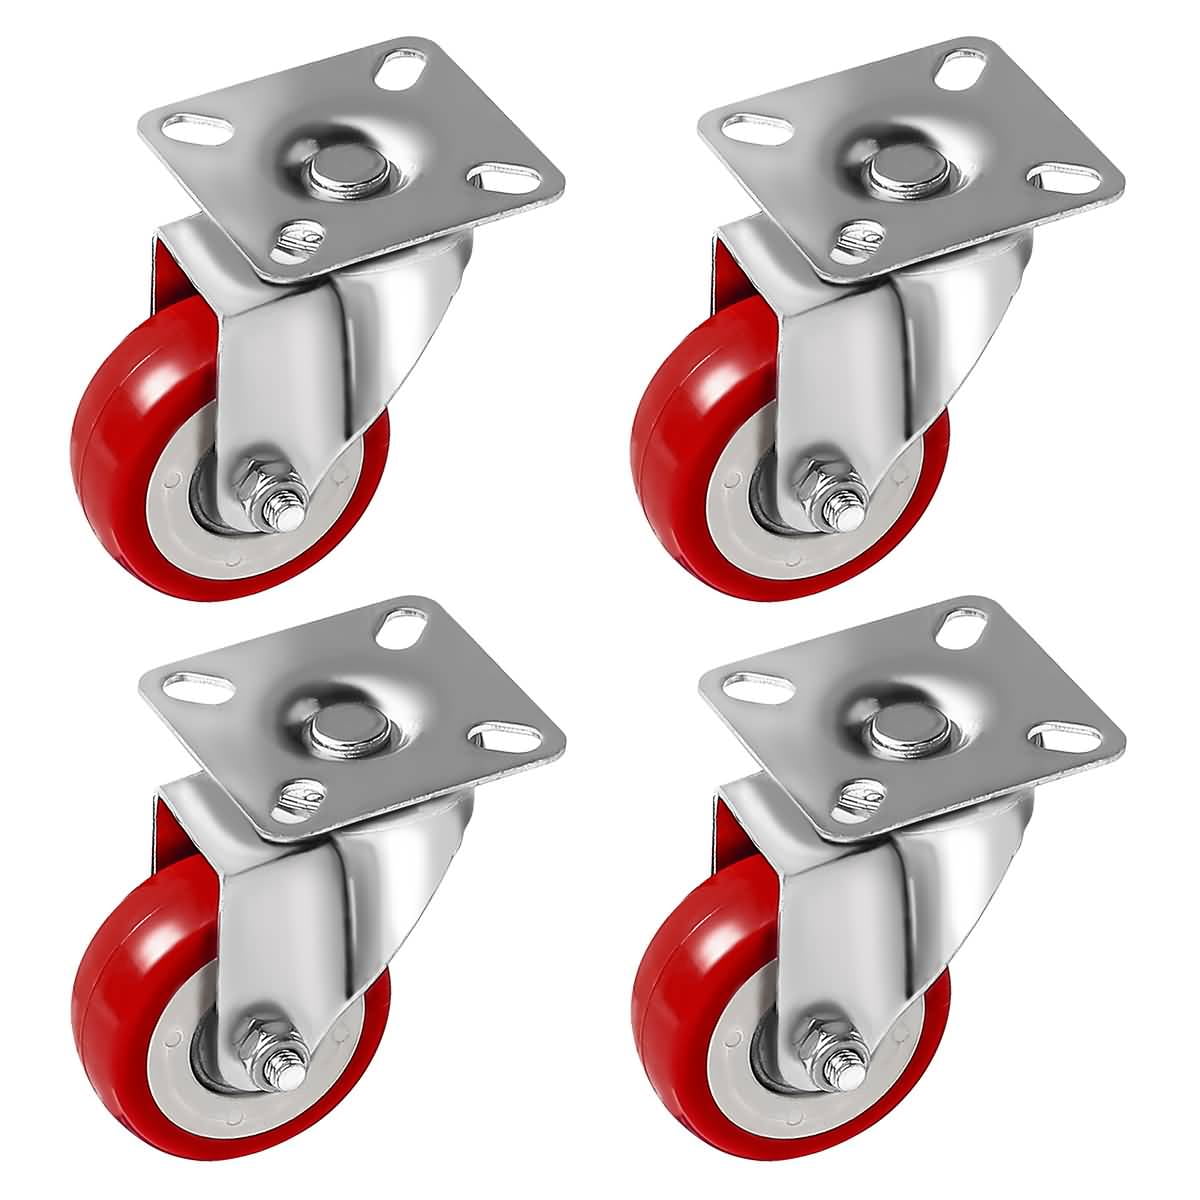 Heavy Duty Safety Plate Casters with no Brake 4Pack 2 inch Swivel Caster Wheels 